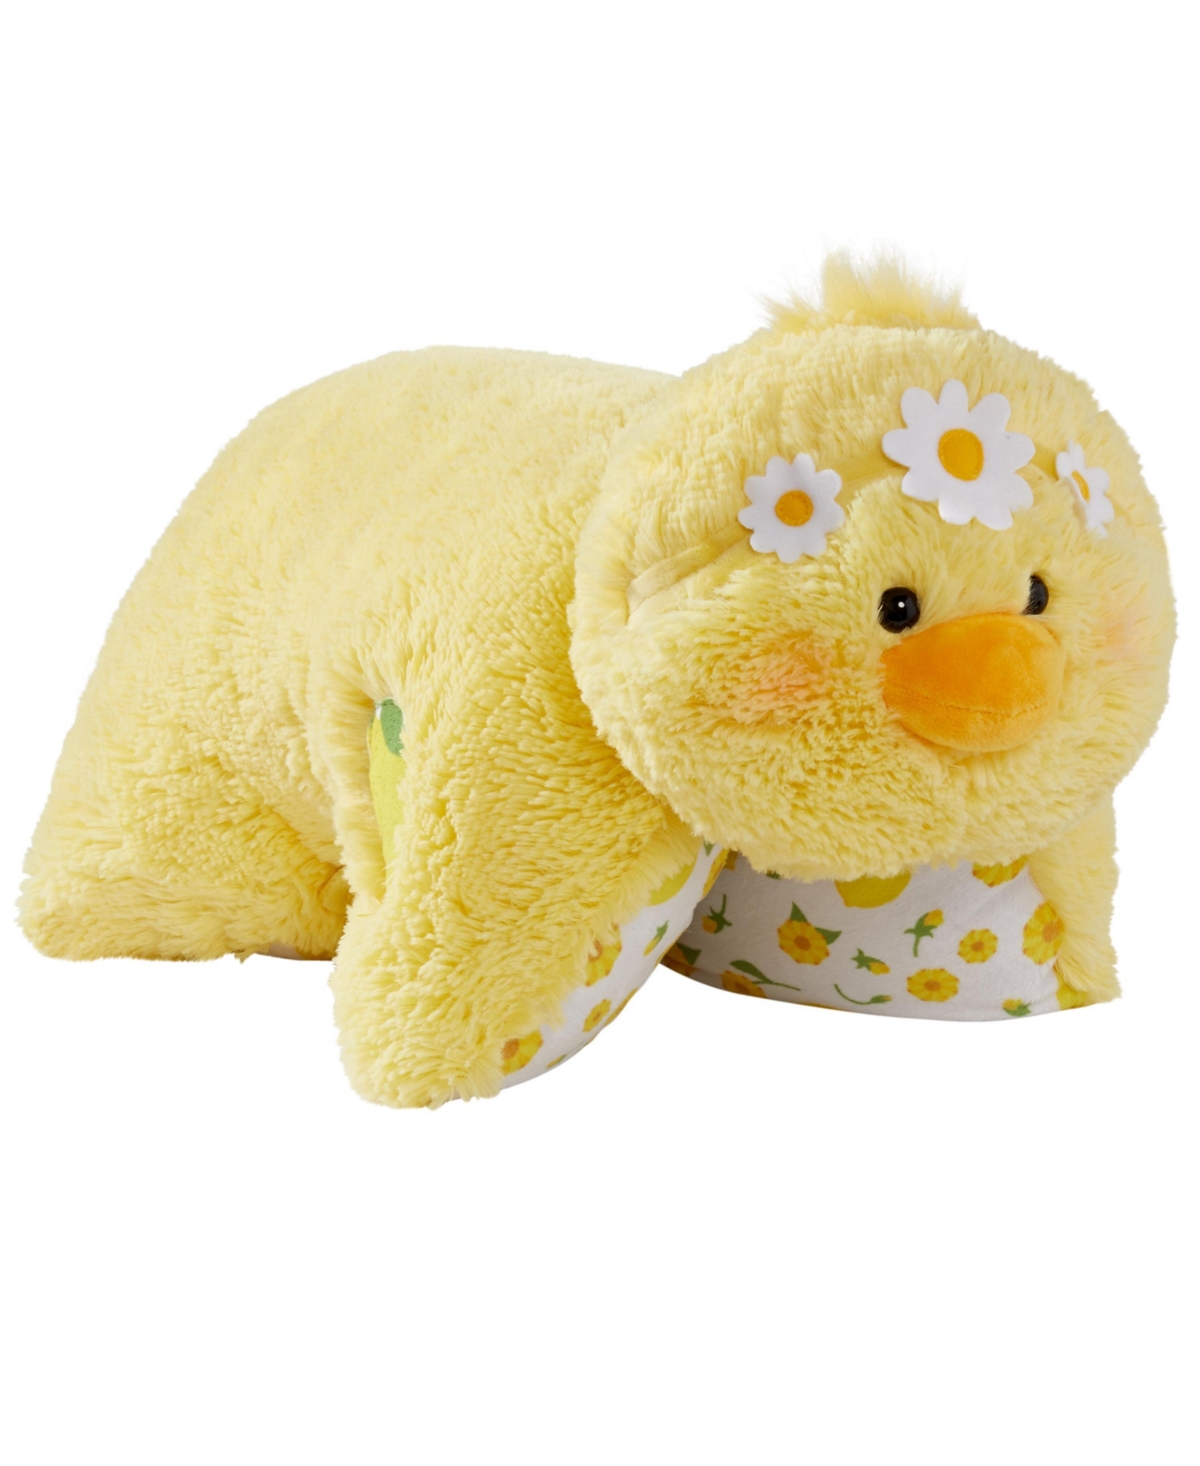 Pillow Pets Sweet Scented Lemon Chick Plush Toy In Yellow